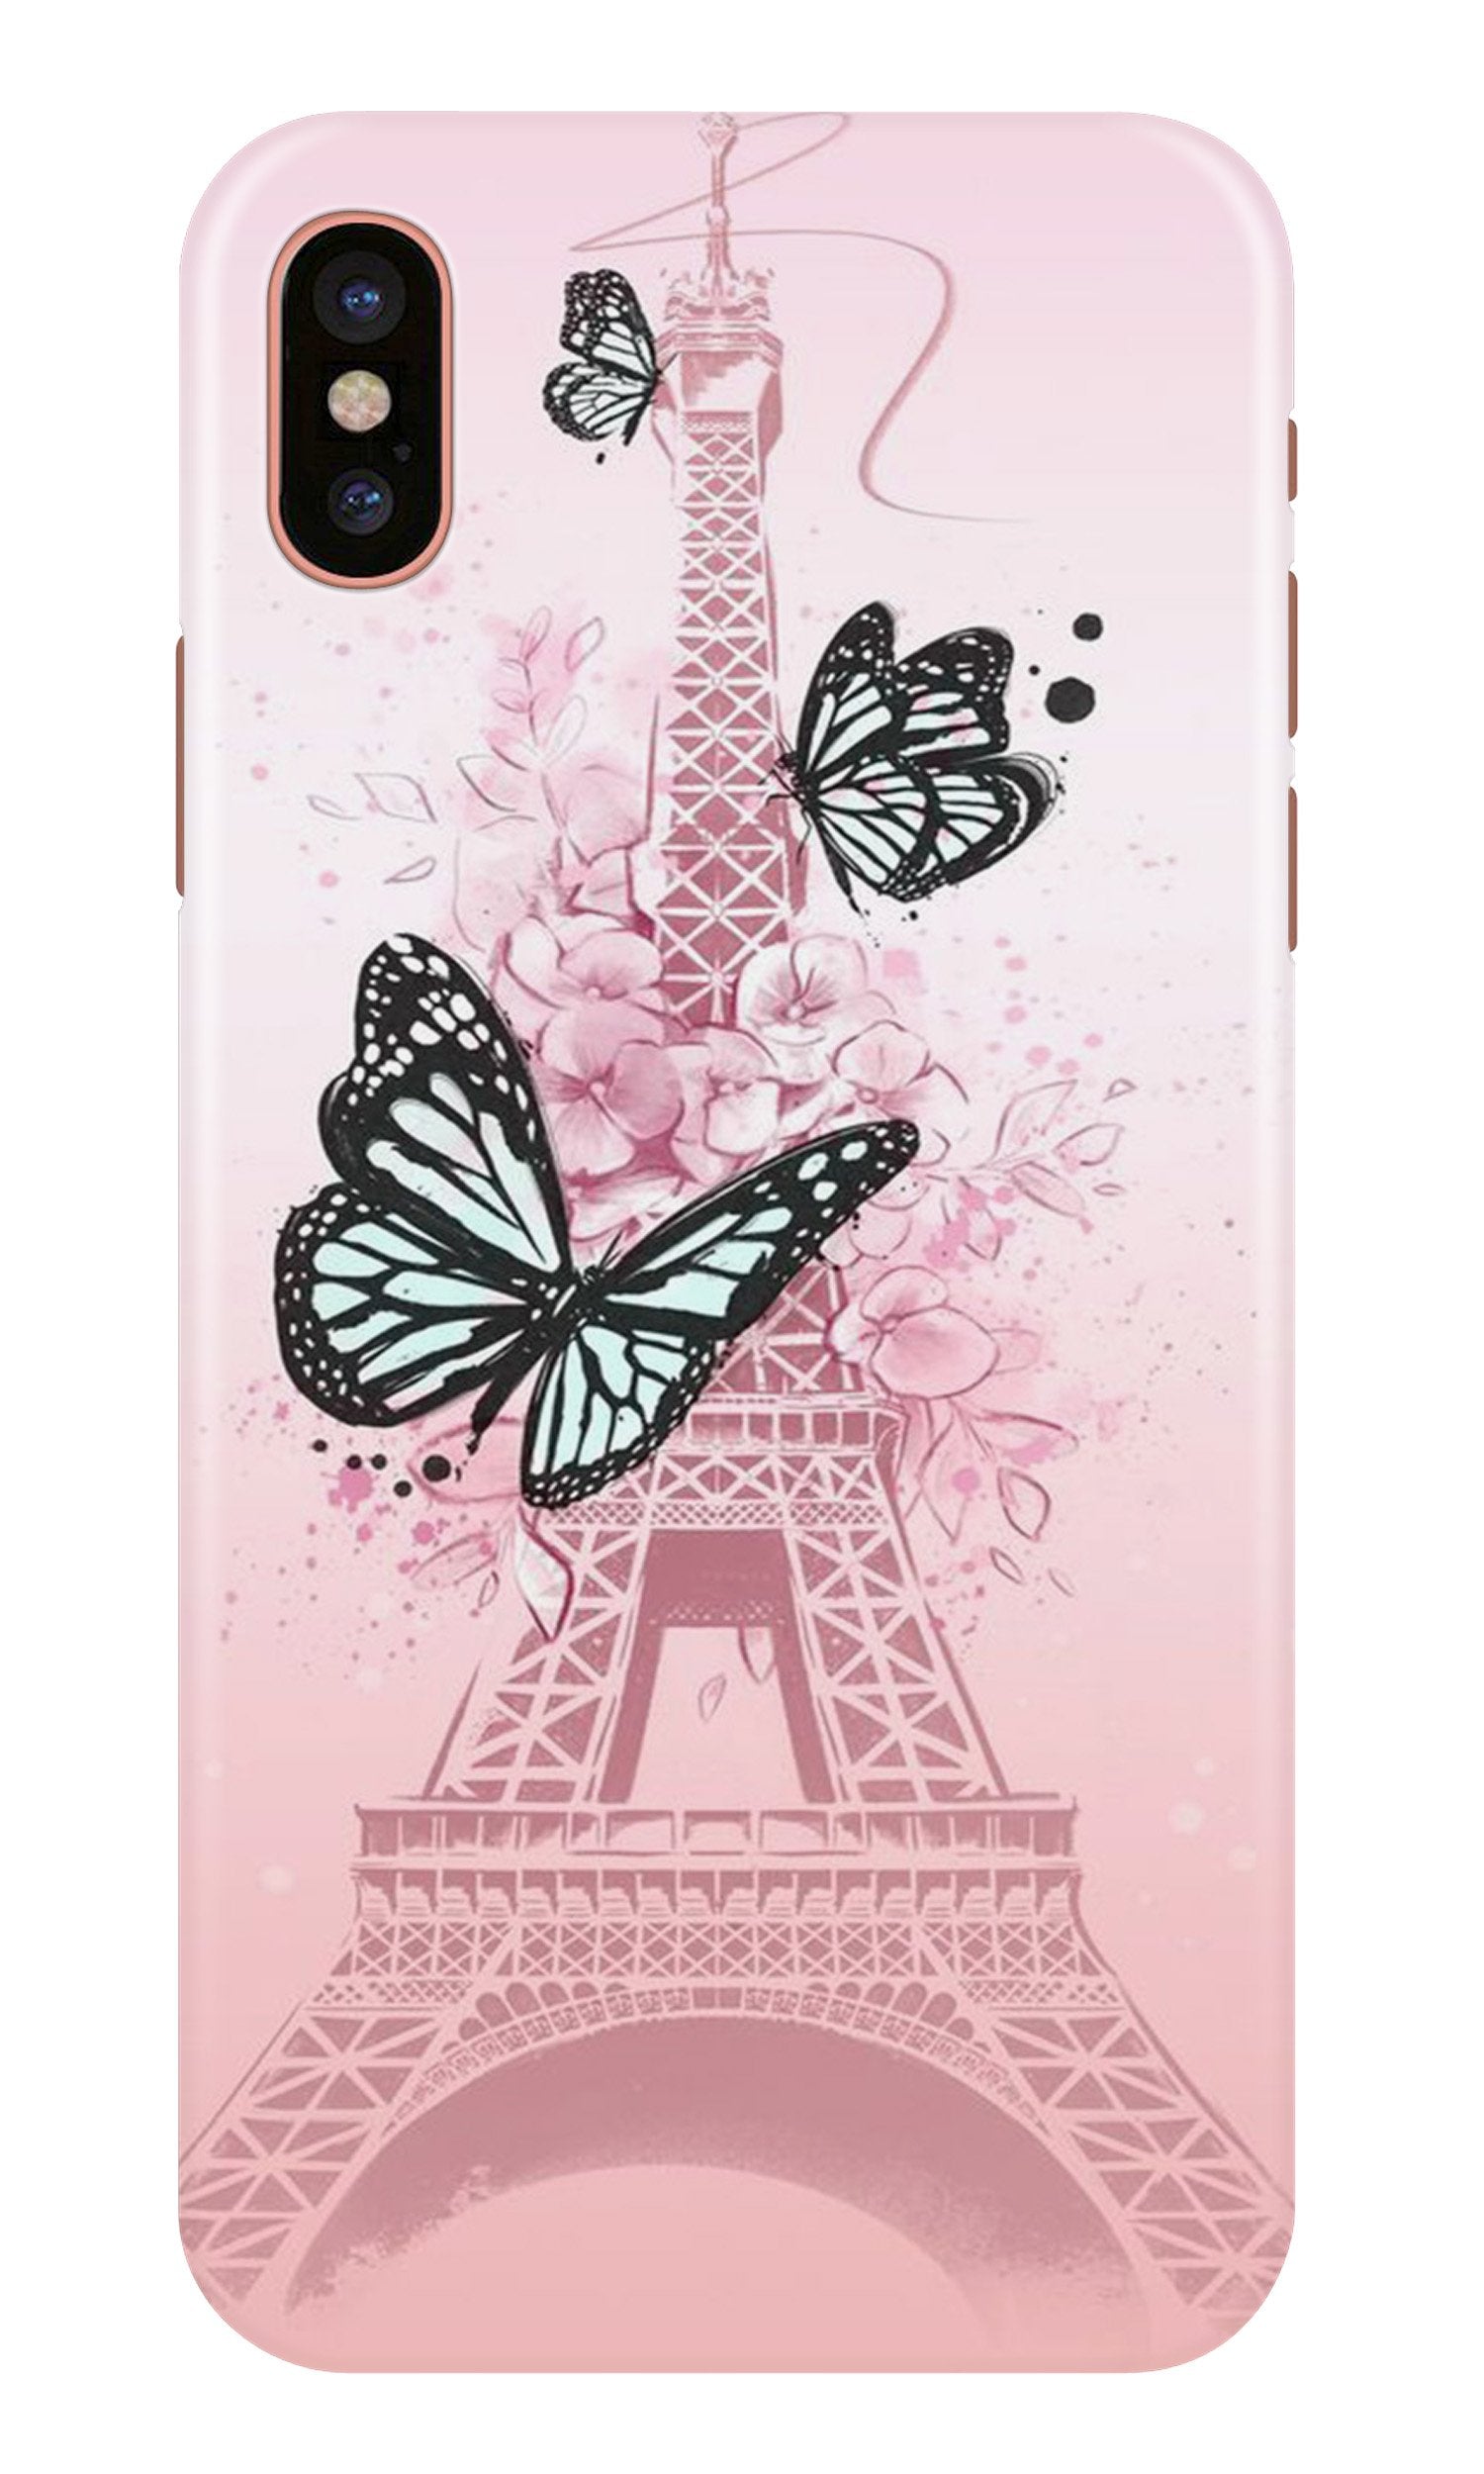 Eiffel Tower Case for iPhone Xr (Design No. 211)